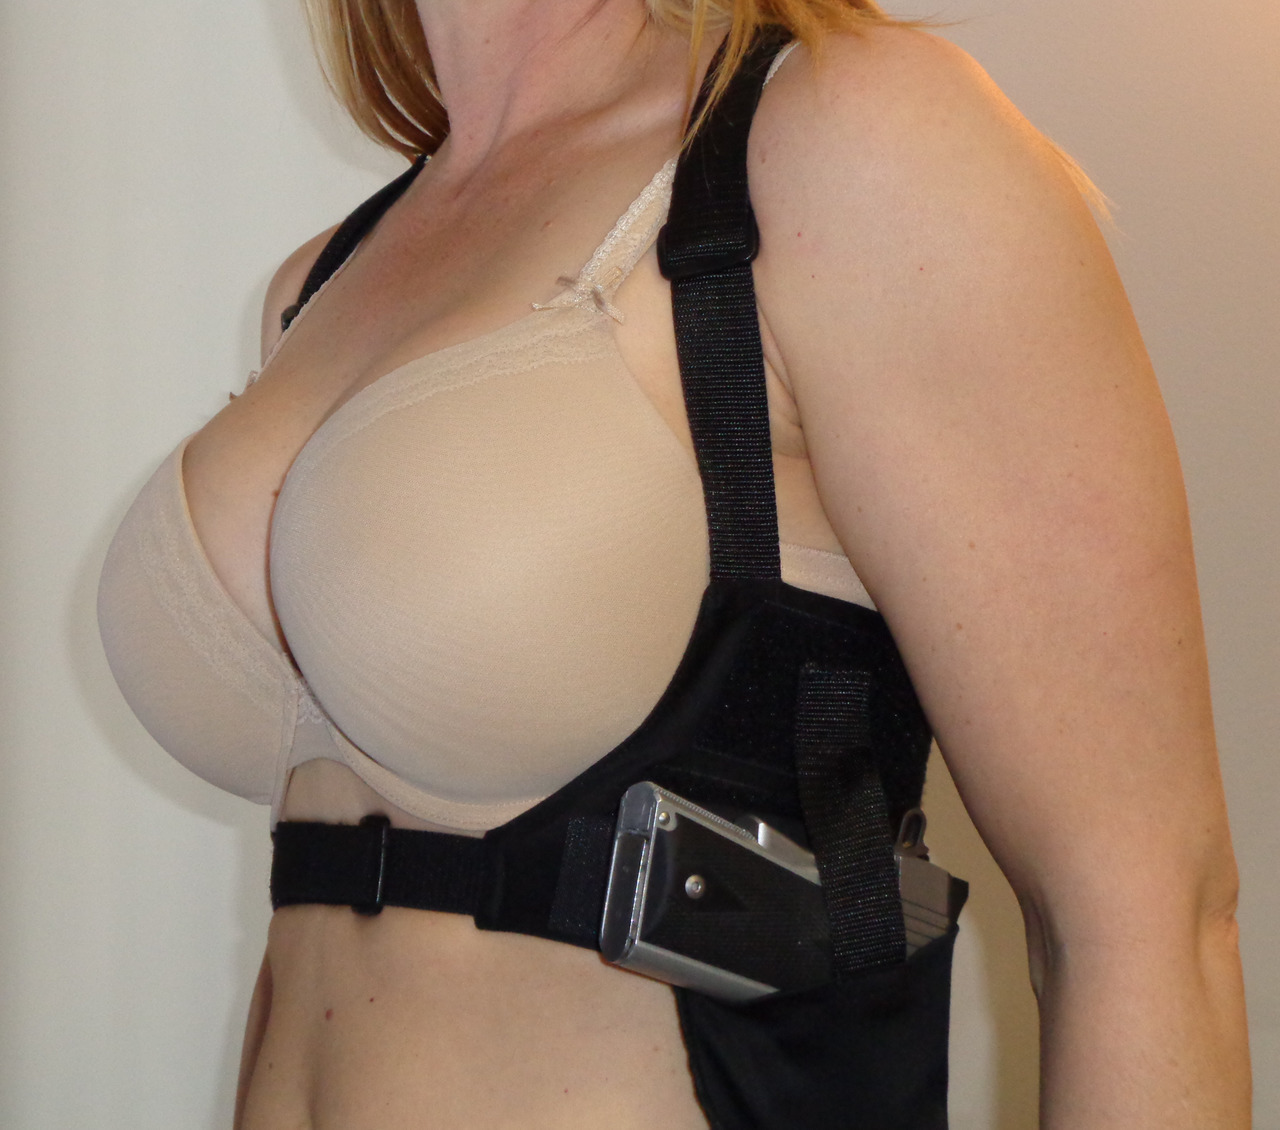 Deep Concealment Holsters for Women - Shoulder and Bra Holster